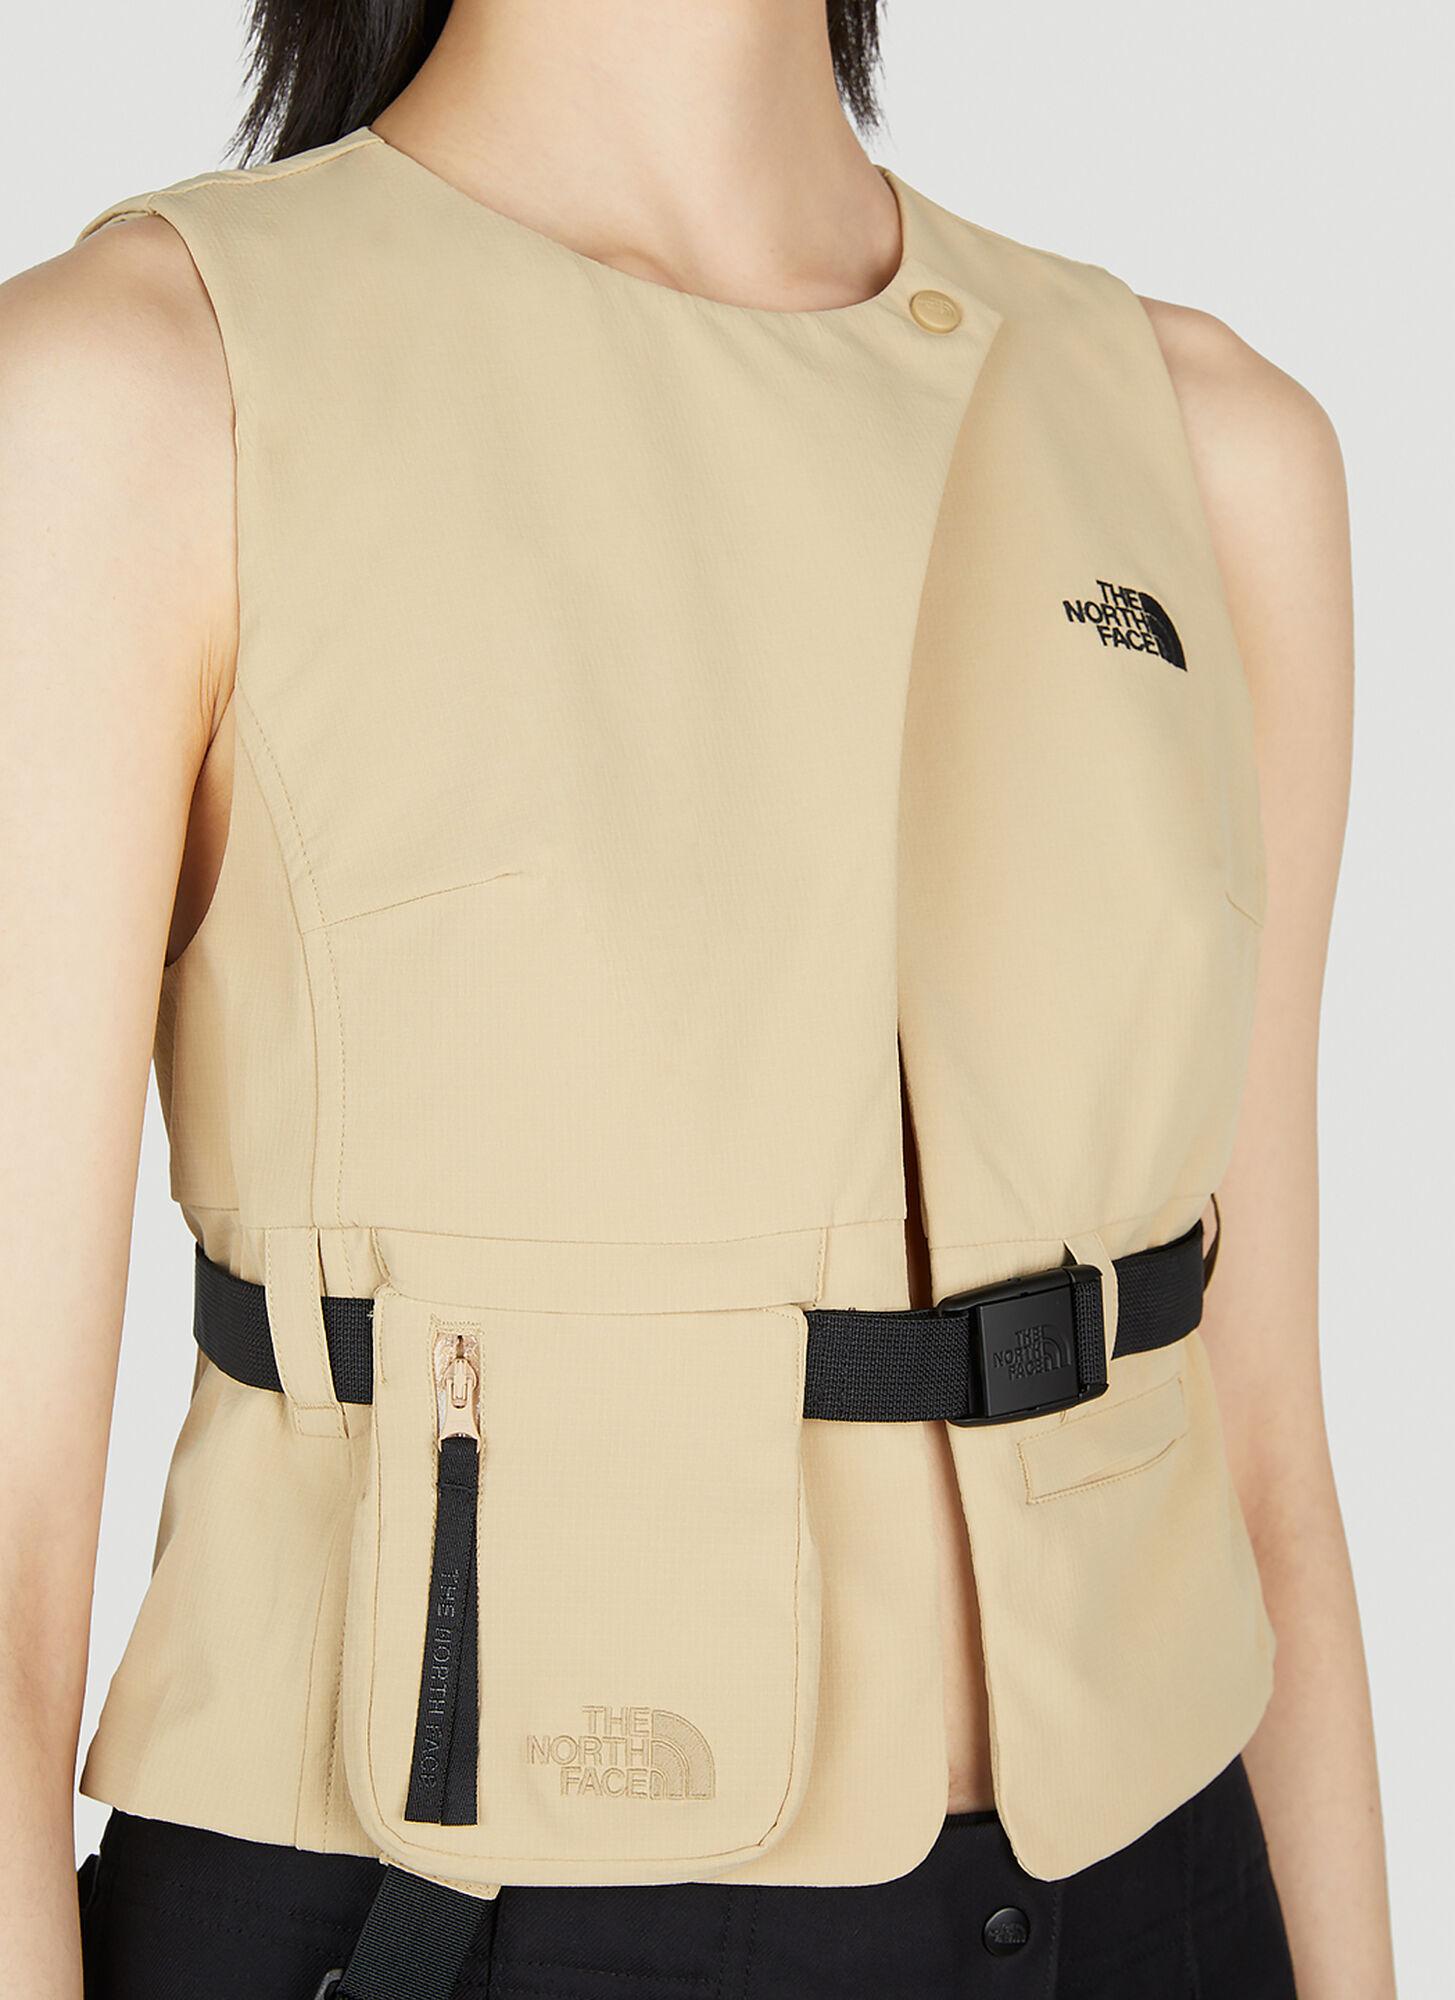 THE NORTH FACE BLACK SERIES City Gilet Jacket in Natural | Lyst